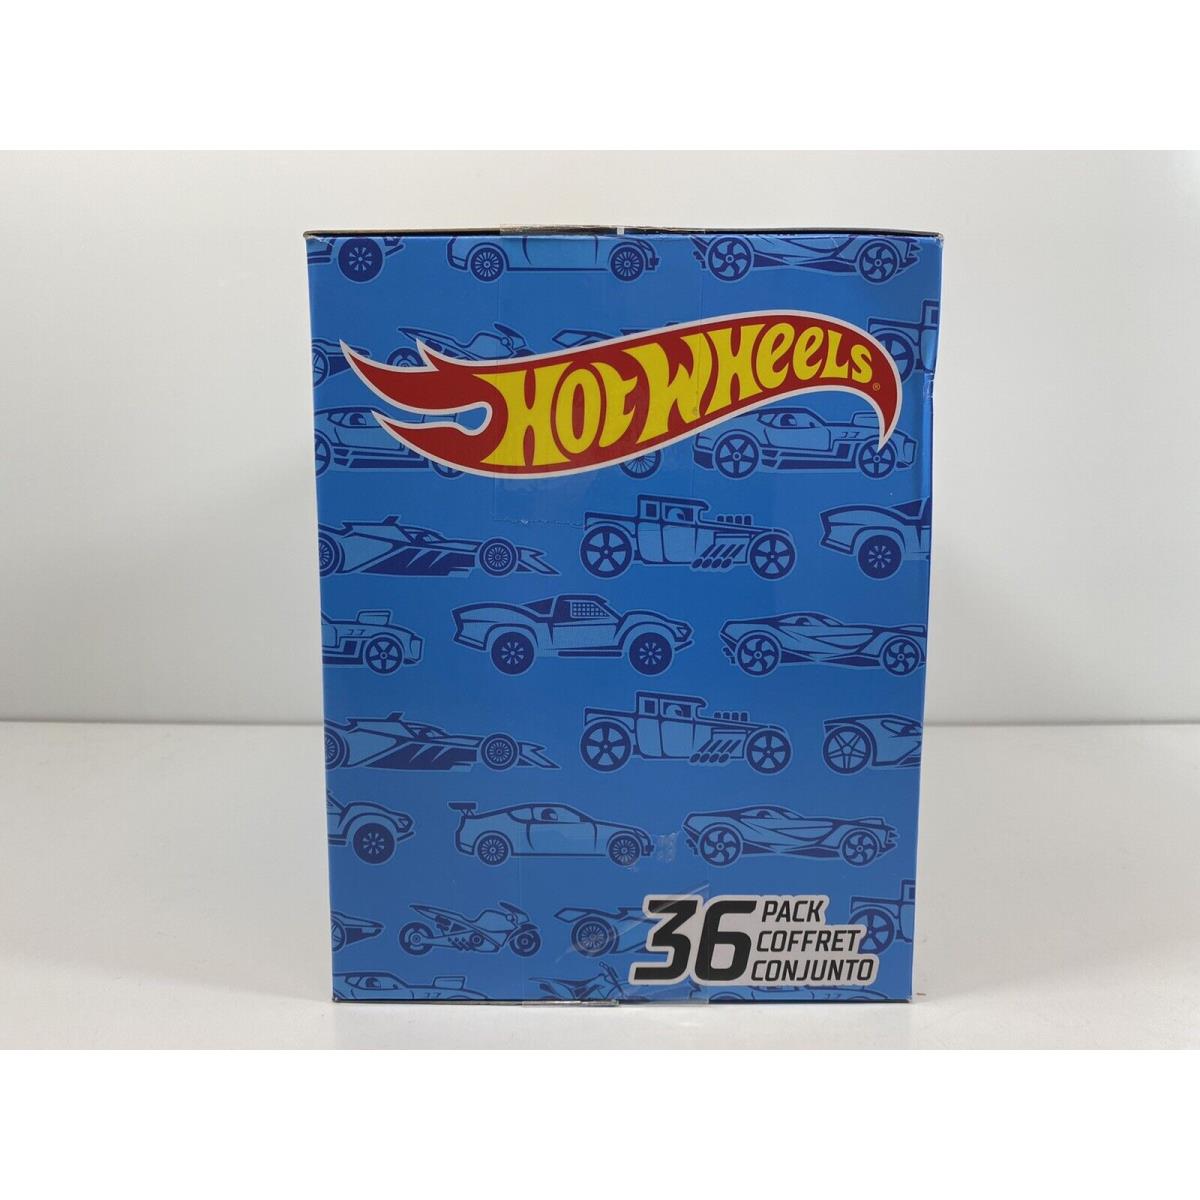 Hot Wheels 36 Car Multi-pack of 1:64 Scale Vehicles For Kids Collectors